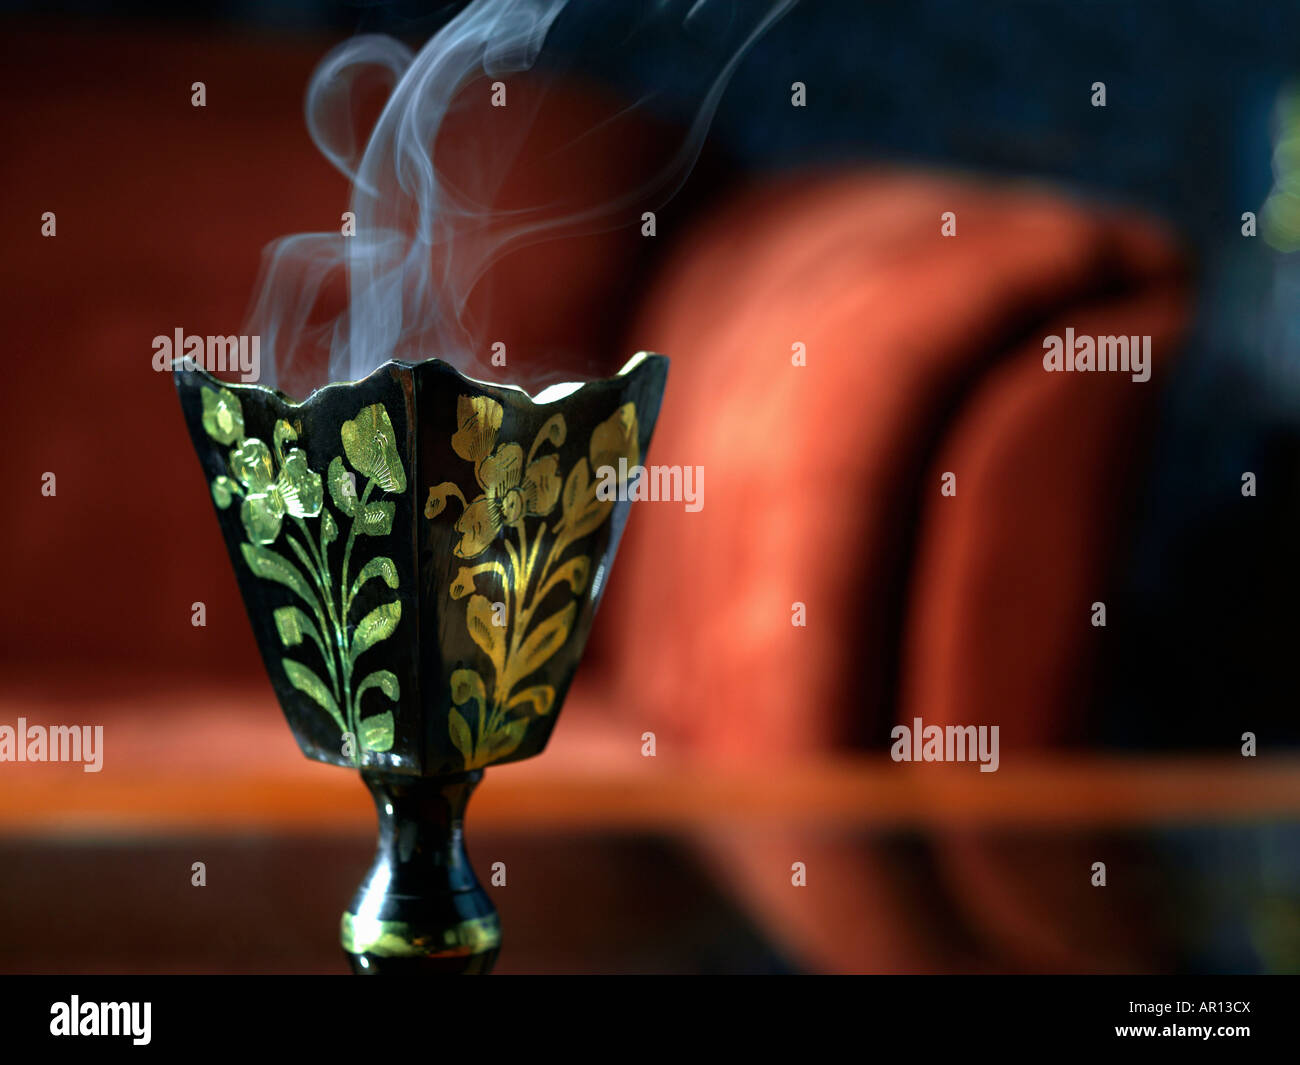 A Close-up view of Incense burner. Stock Photo